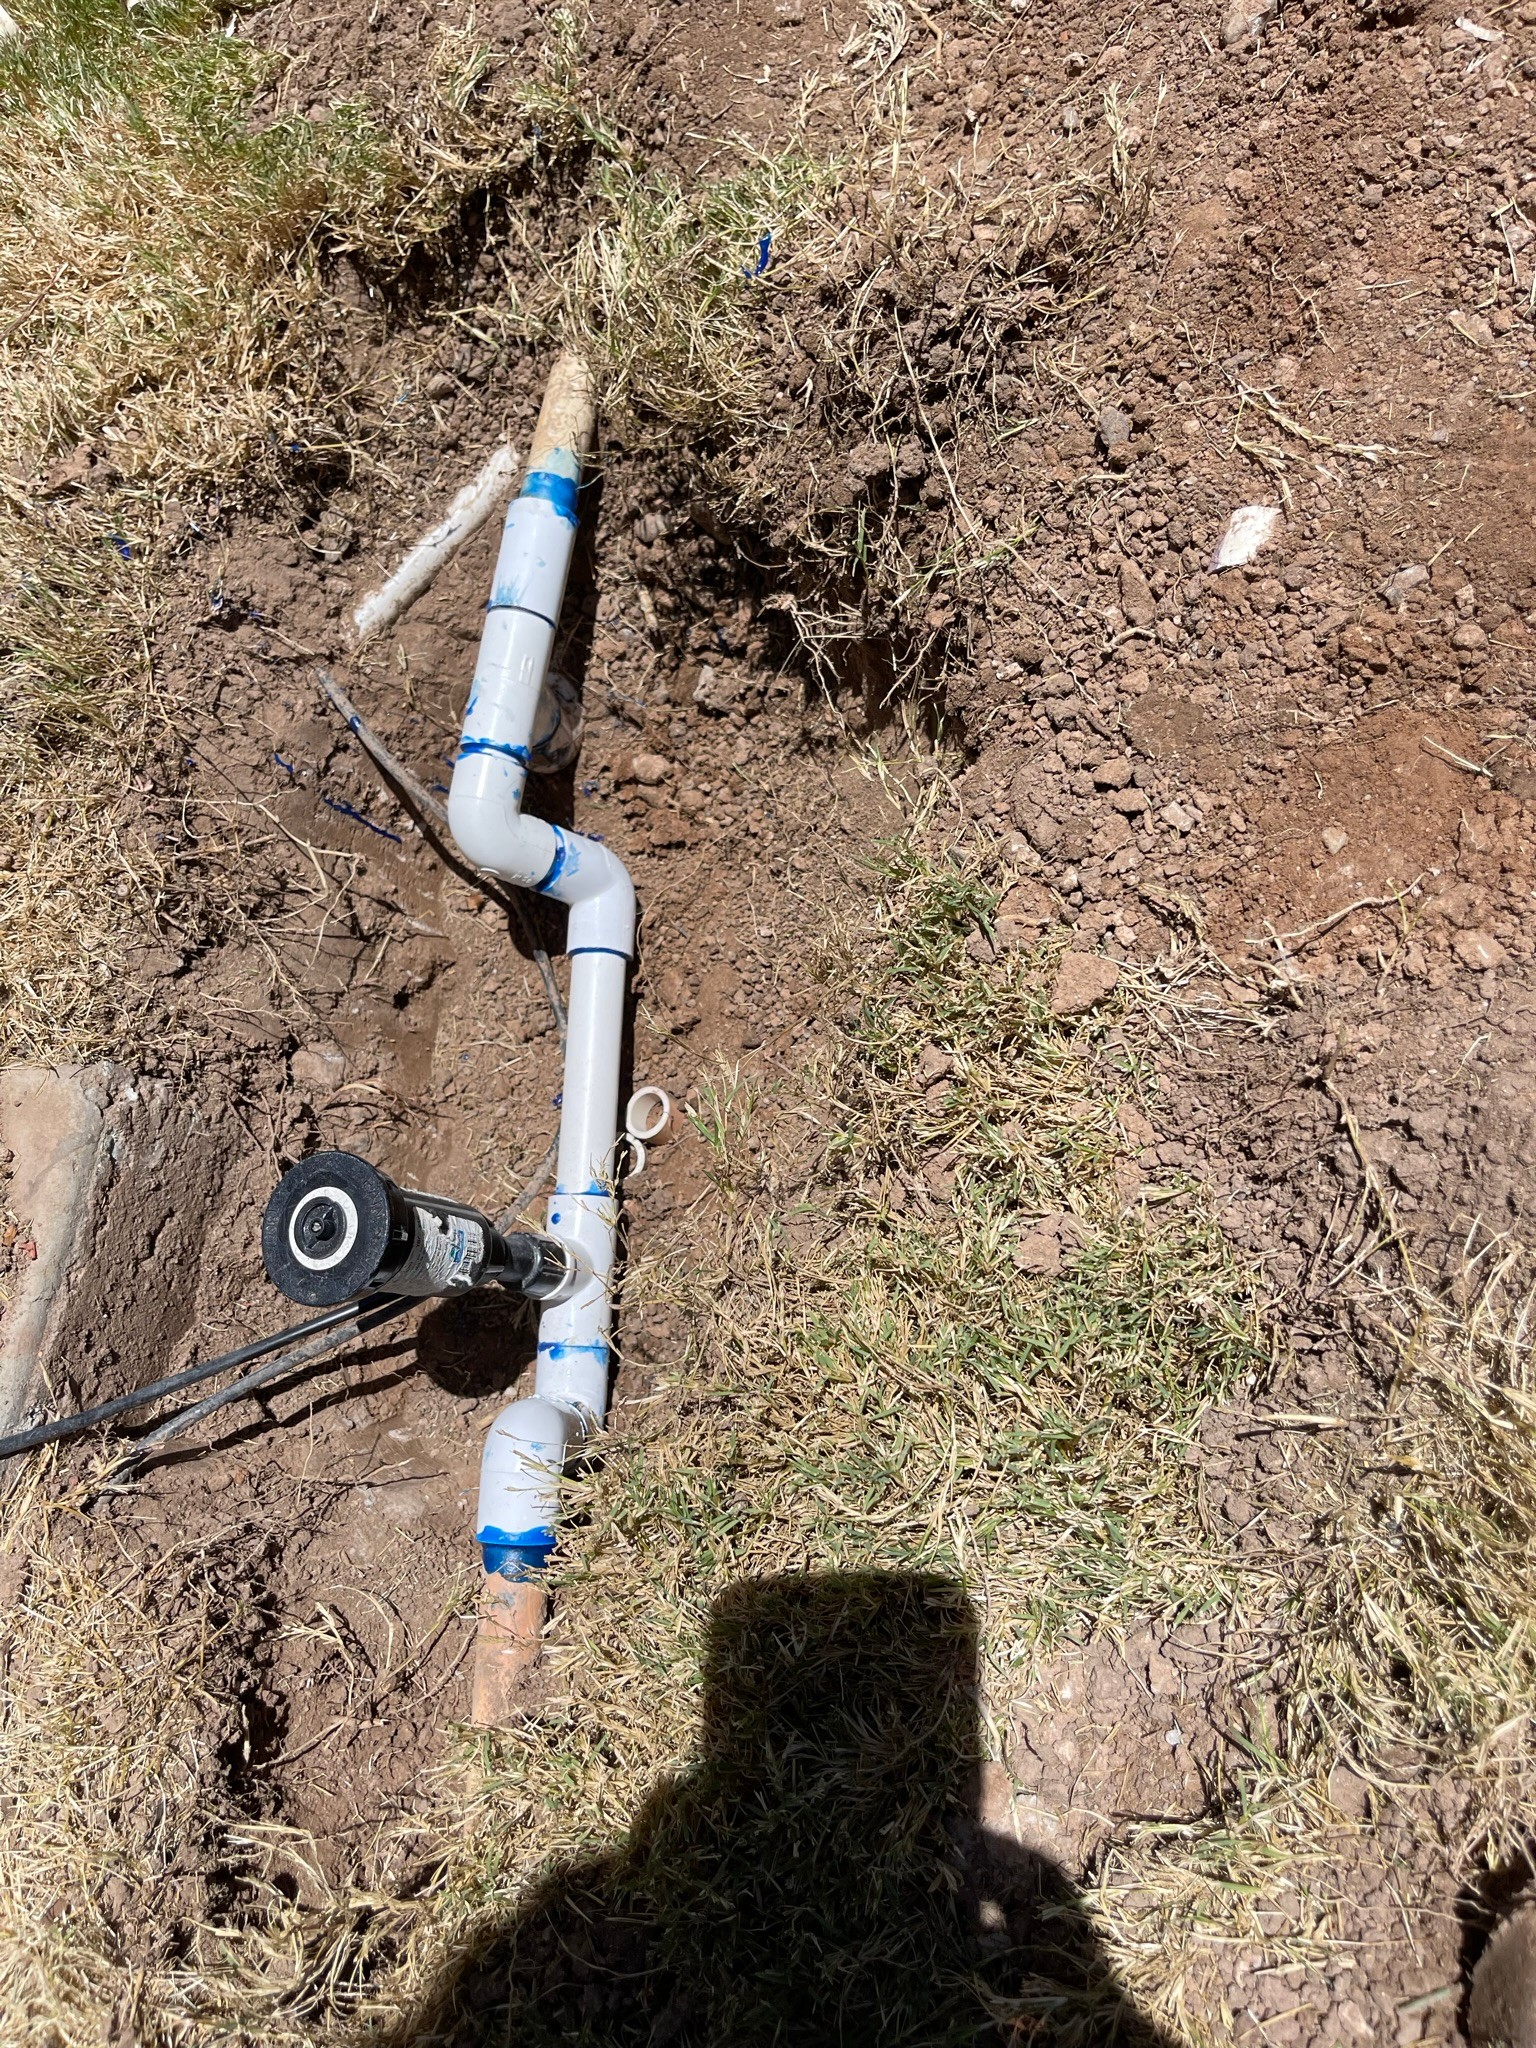 Sprinkler System Repair and lawn repair for Bobbys Palm and Tree Service LLC in Surprise, AZ